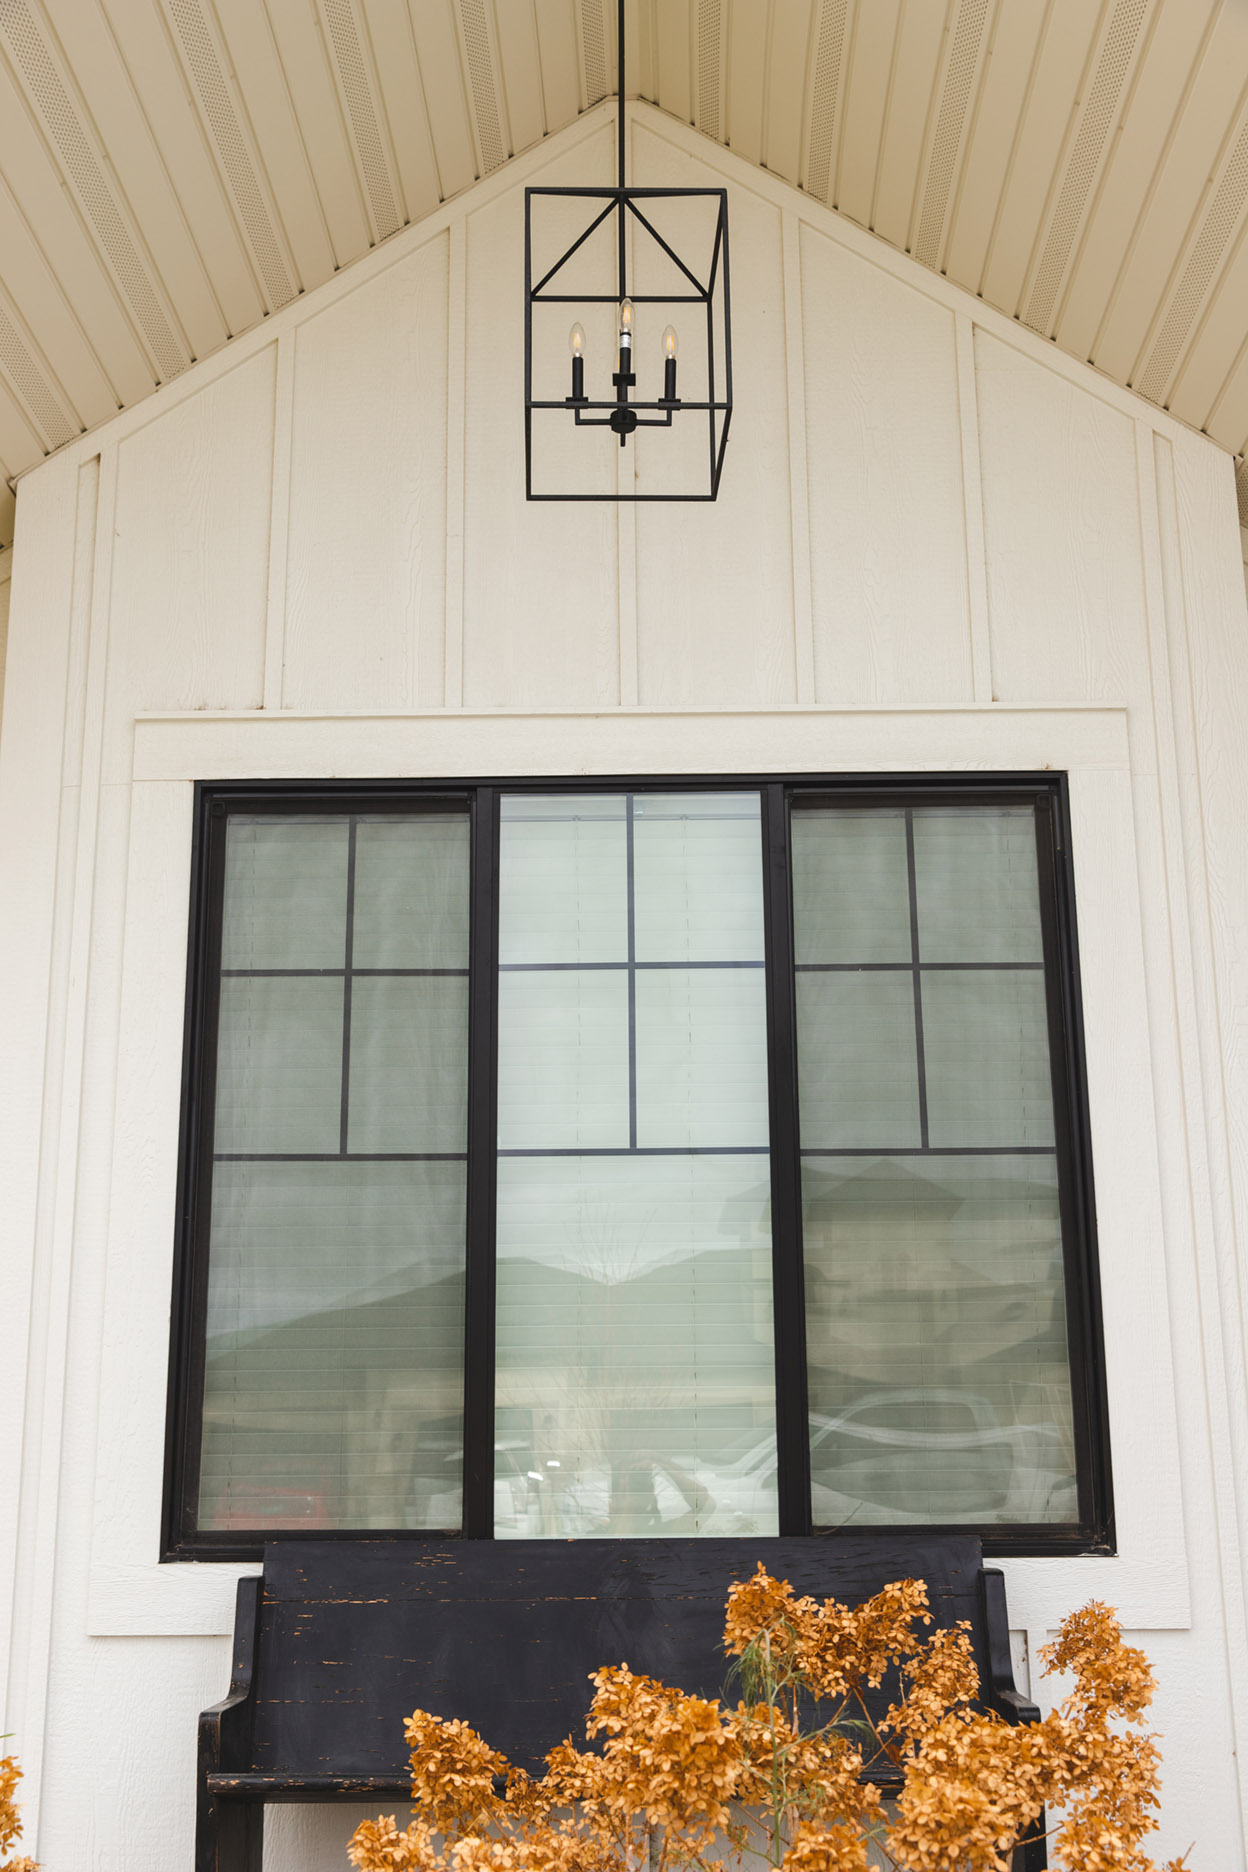 Window of the Eaves with bench in front, part of a beautiful custom built house in Twin Falls, Idaho.